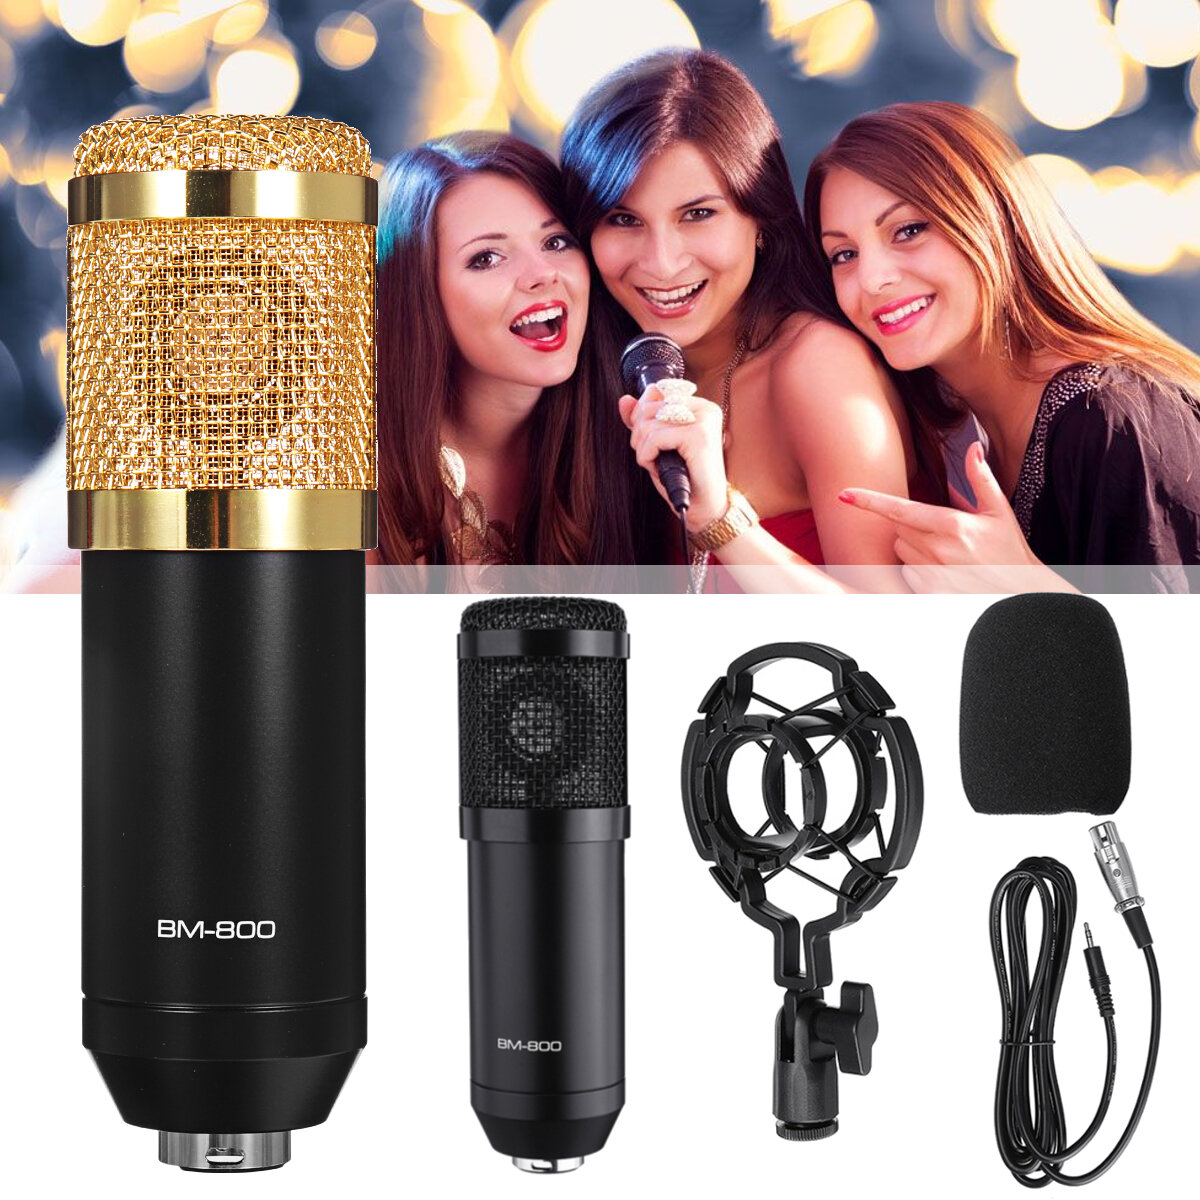 

Bakeey Professional Studio Condenser Microphone 3.5mm Wired Condenser Sound Recording Microphone For Computer Karaoke KT